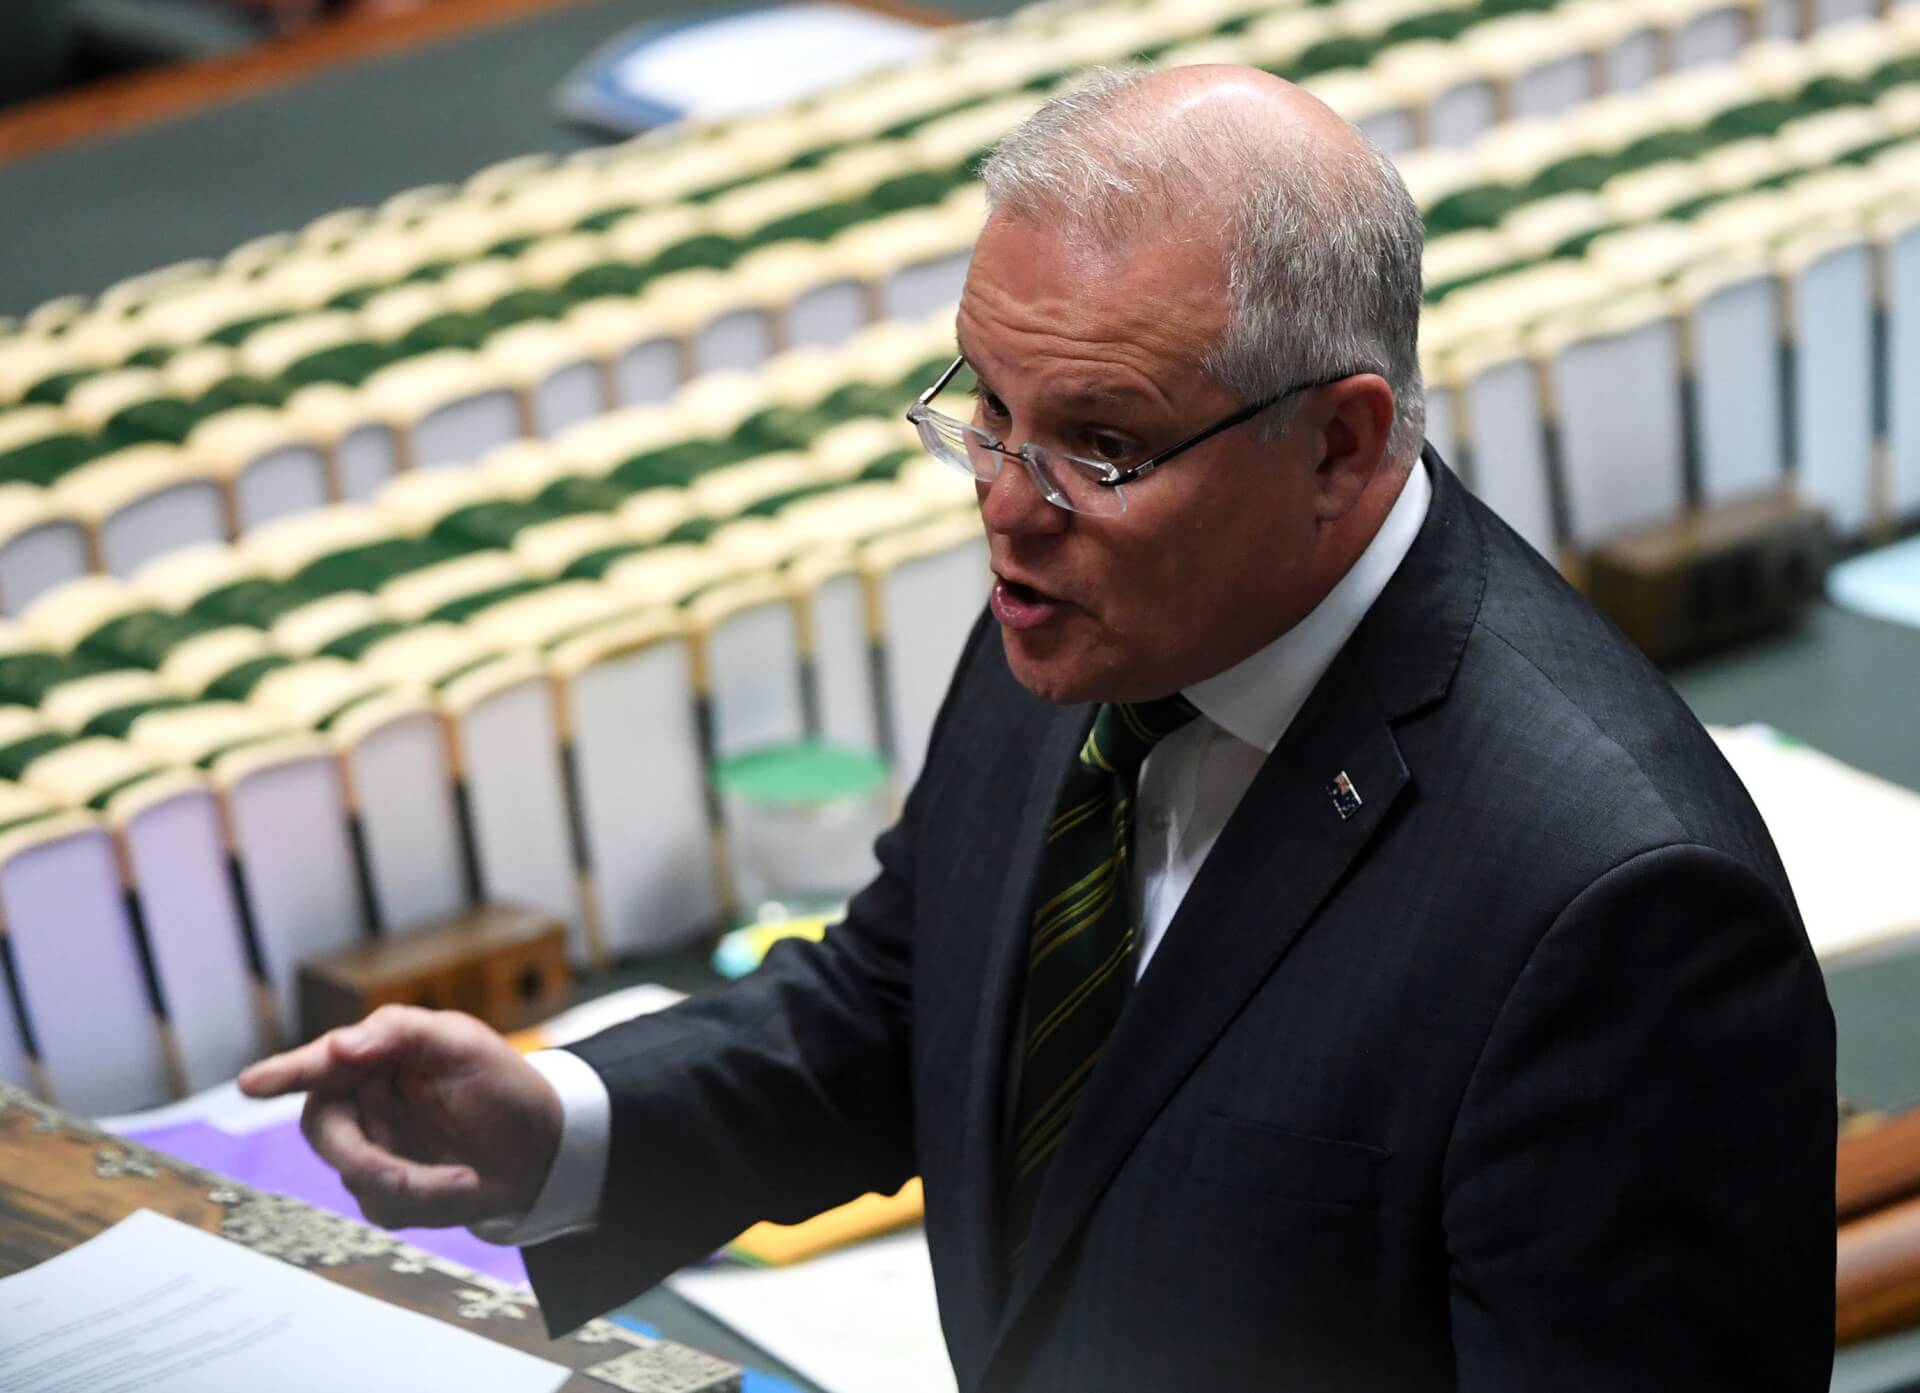 Amid Calls to Remove Captain James Cook Statues, Morrison Claims “No Slavery in Australia”